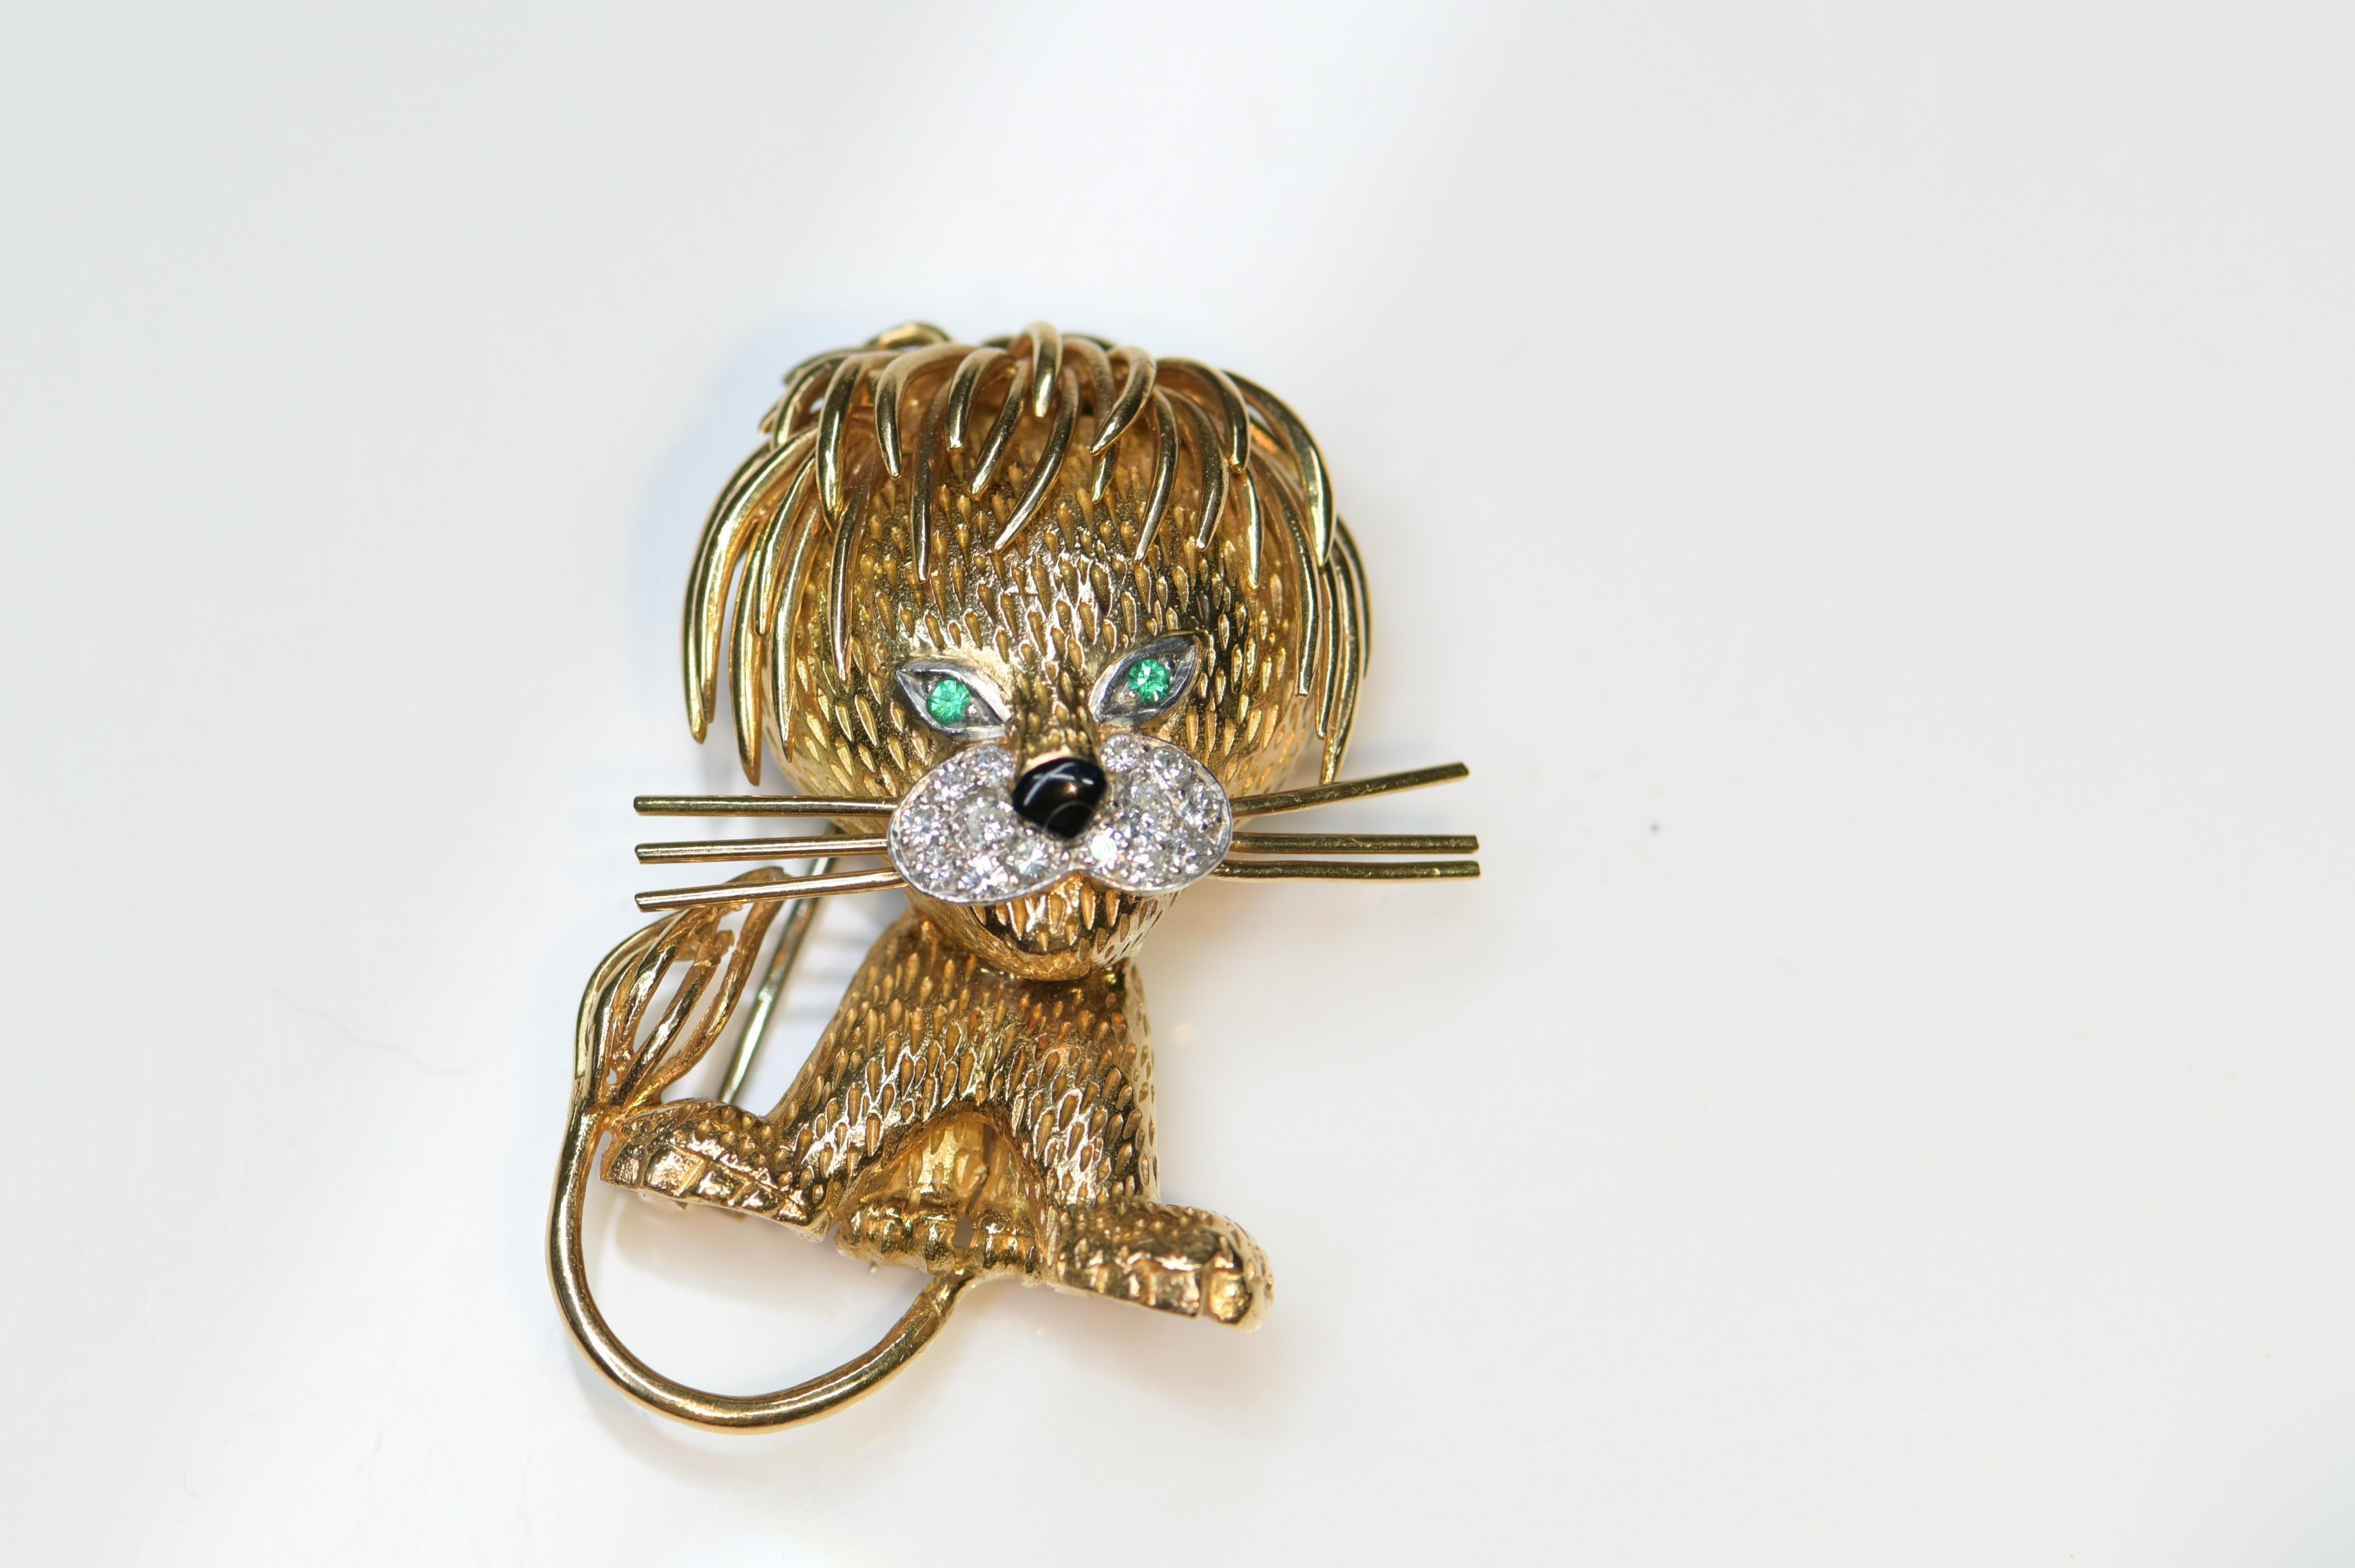 Circa 1970s Van Cleef and Arpels France 18K Yellow Gold Lion Clip brooch, measuring 4.7cm in length and 3.4 cm wide. finely detailed, set with Emerald Eyes and Diamonds around the mouth and further decorated with a Black enamel nose.  This is the